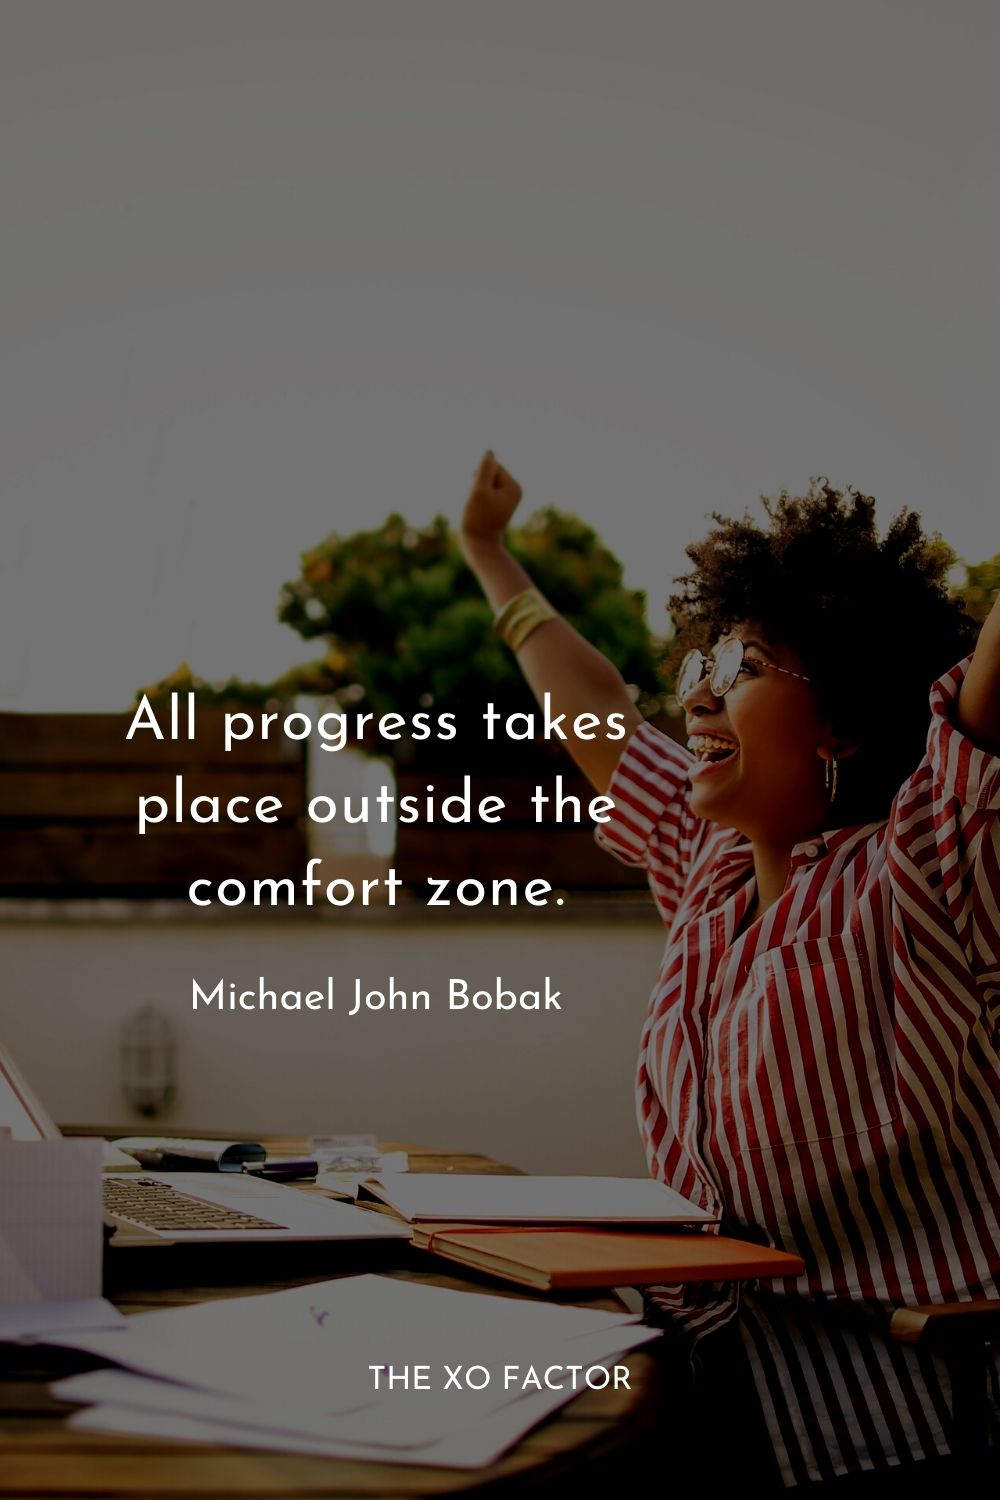 All progress takes place outside the comfort zone.